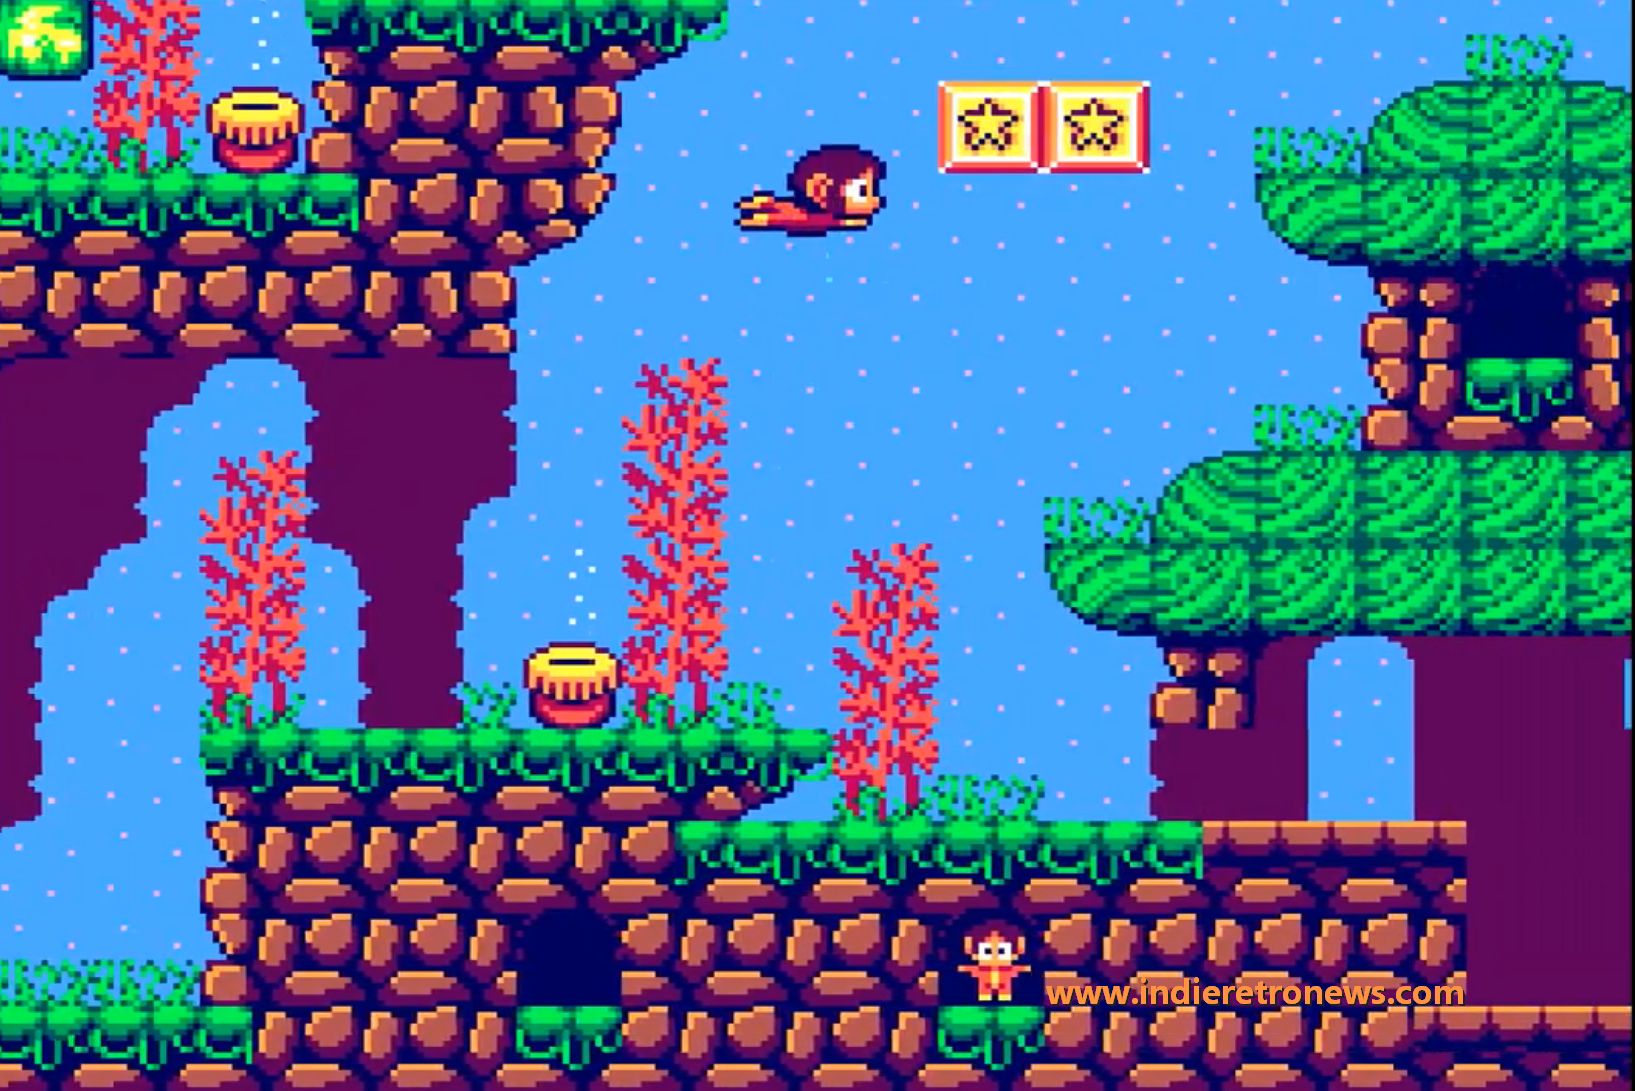 Indie Retro News: Alex Kidd 3 Curse In Miracle World - HOT NEWS as High grade SMS fan game gets a release!